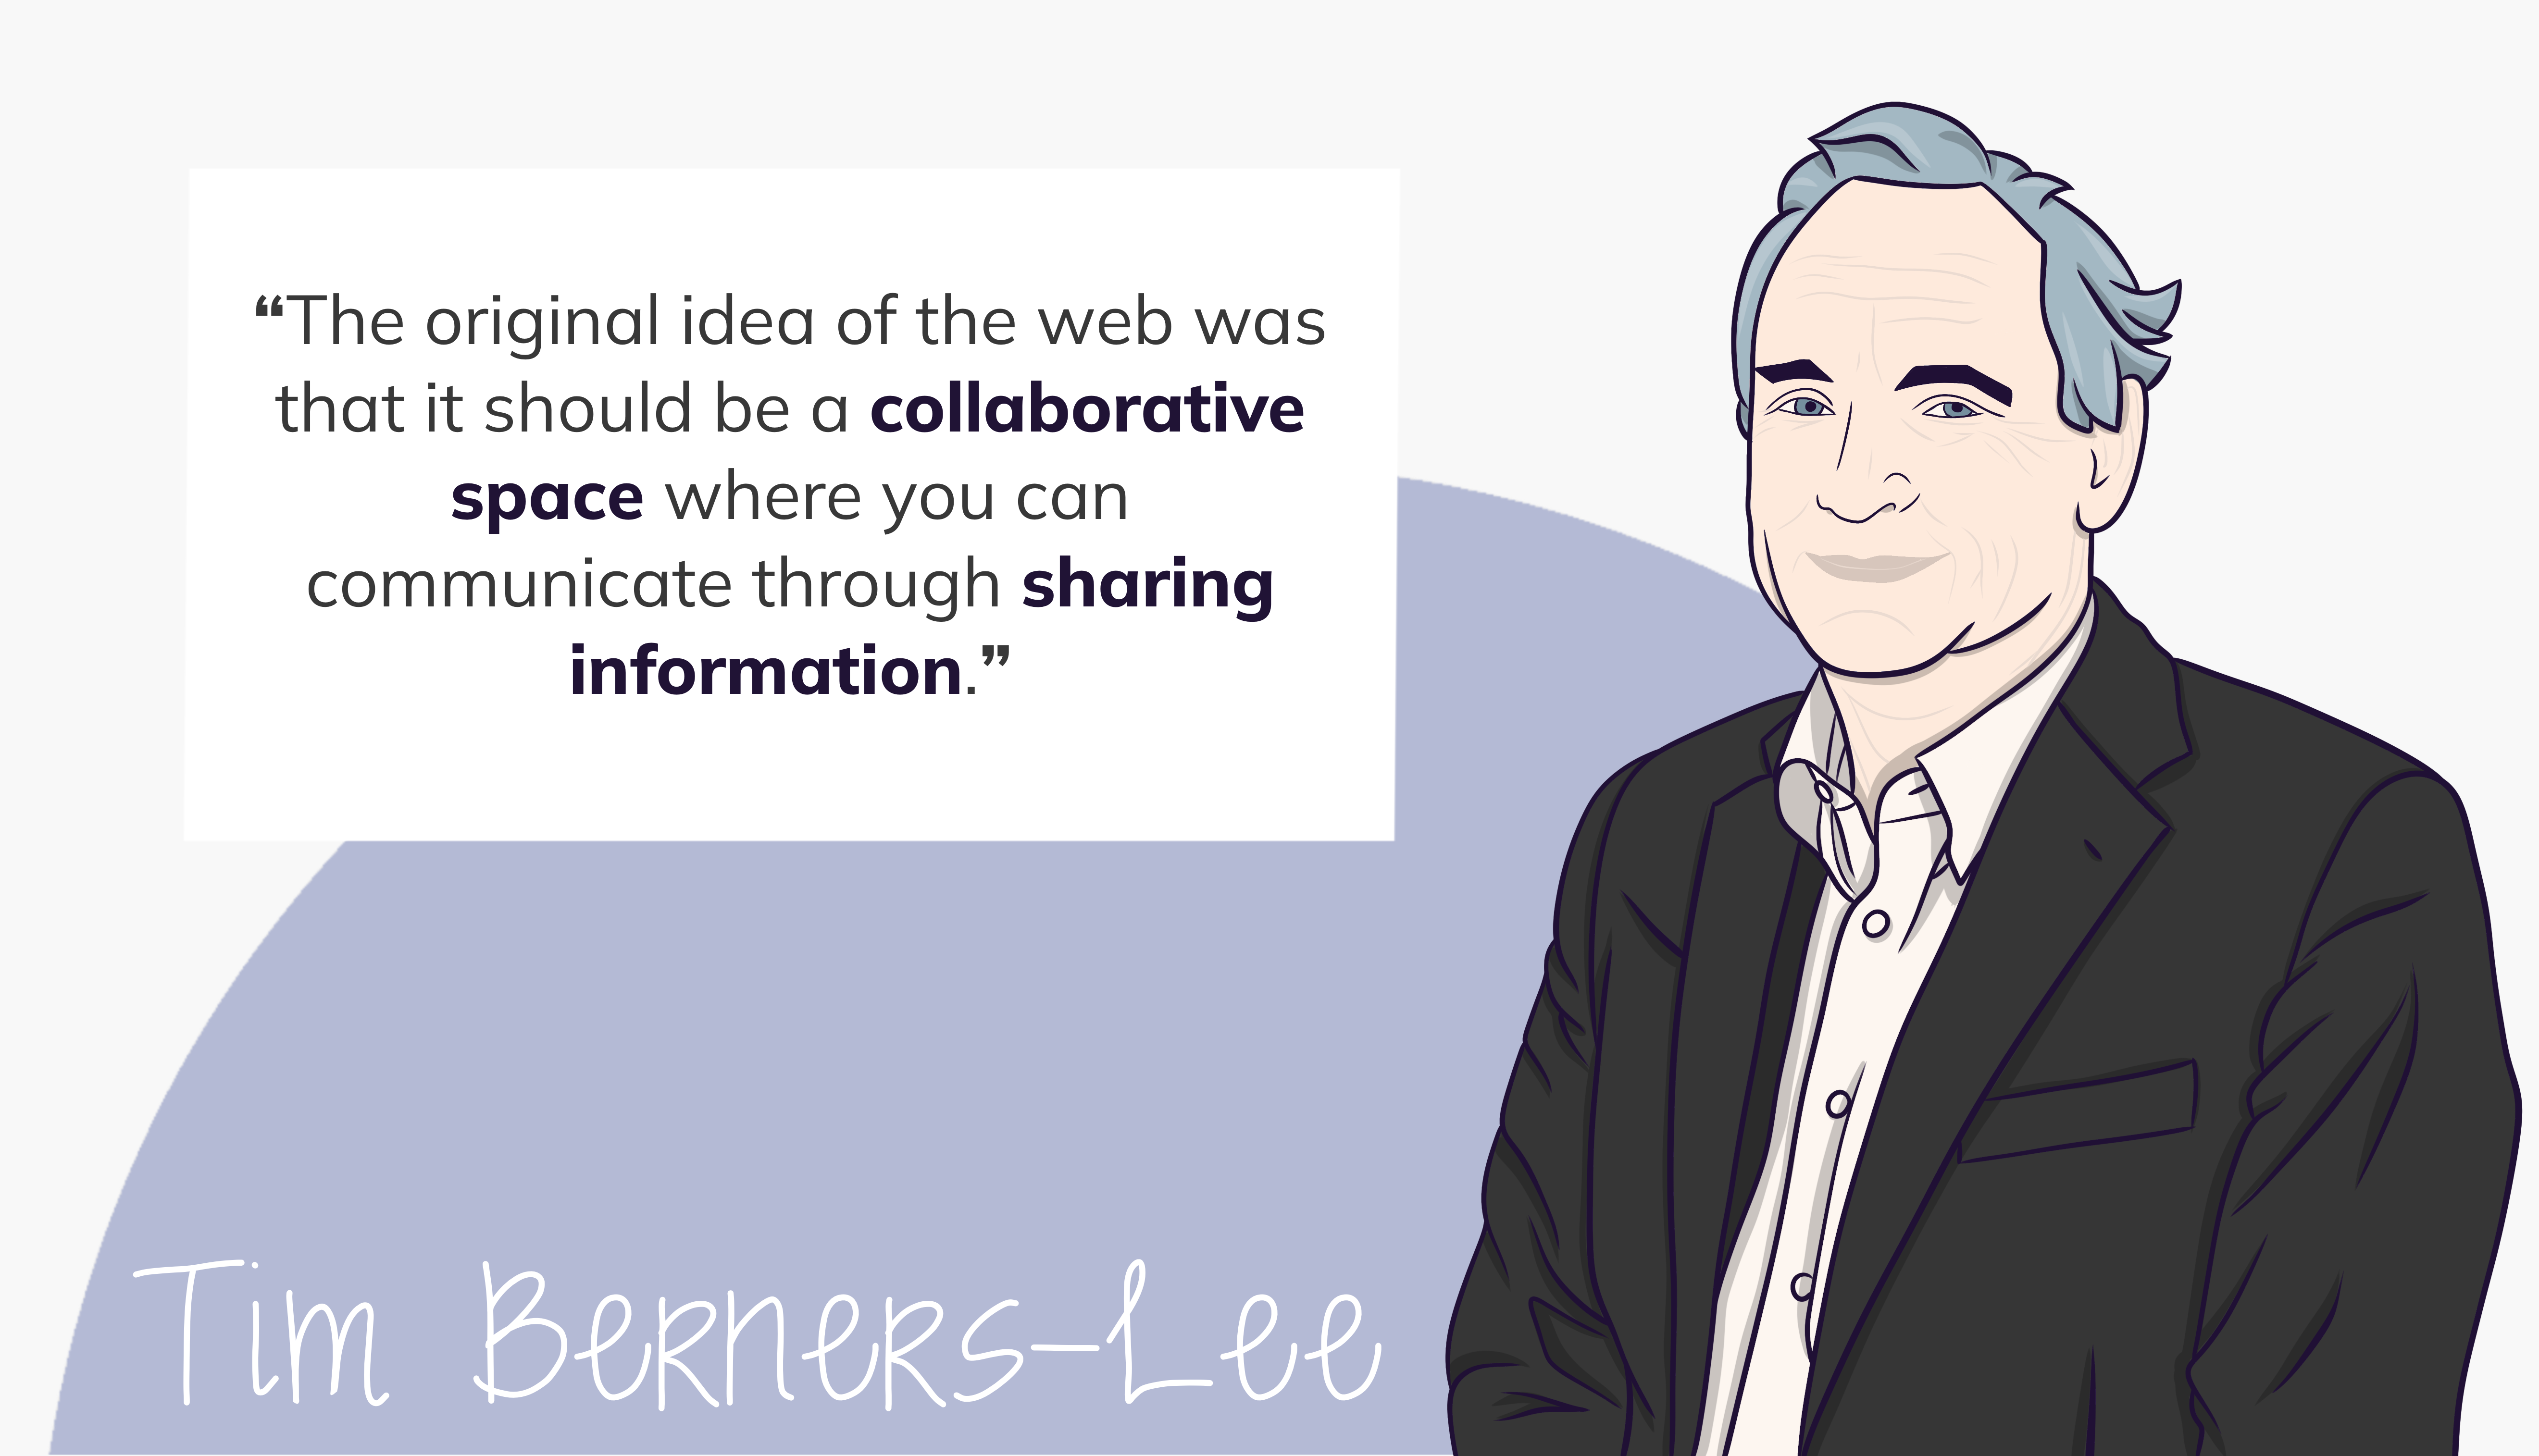 Quote by Tim Berners-Lee saying 'The original idea of the web was that it should be a collaborative space where you can communicate through sharing information.'